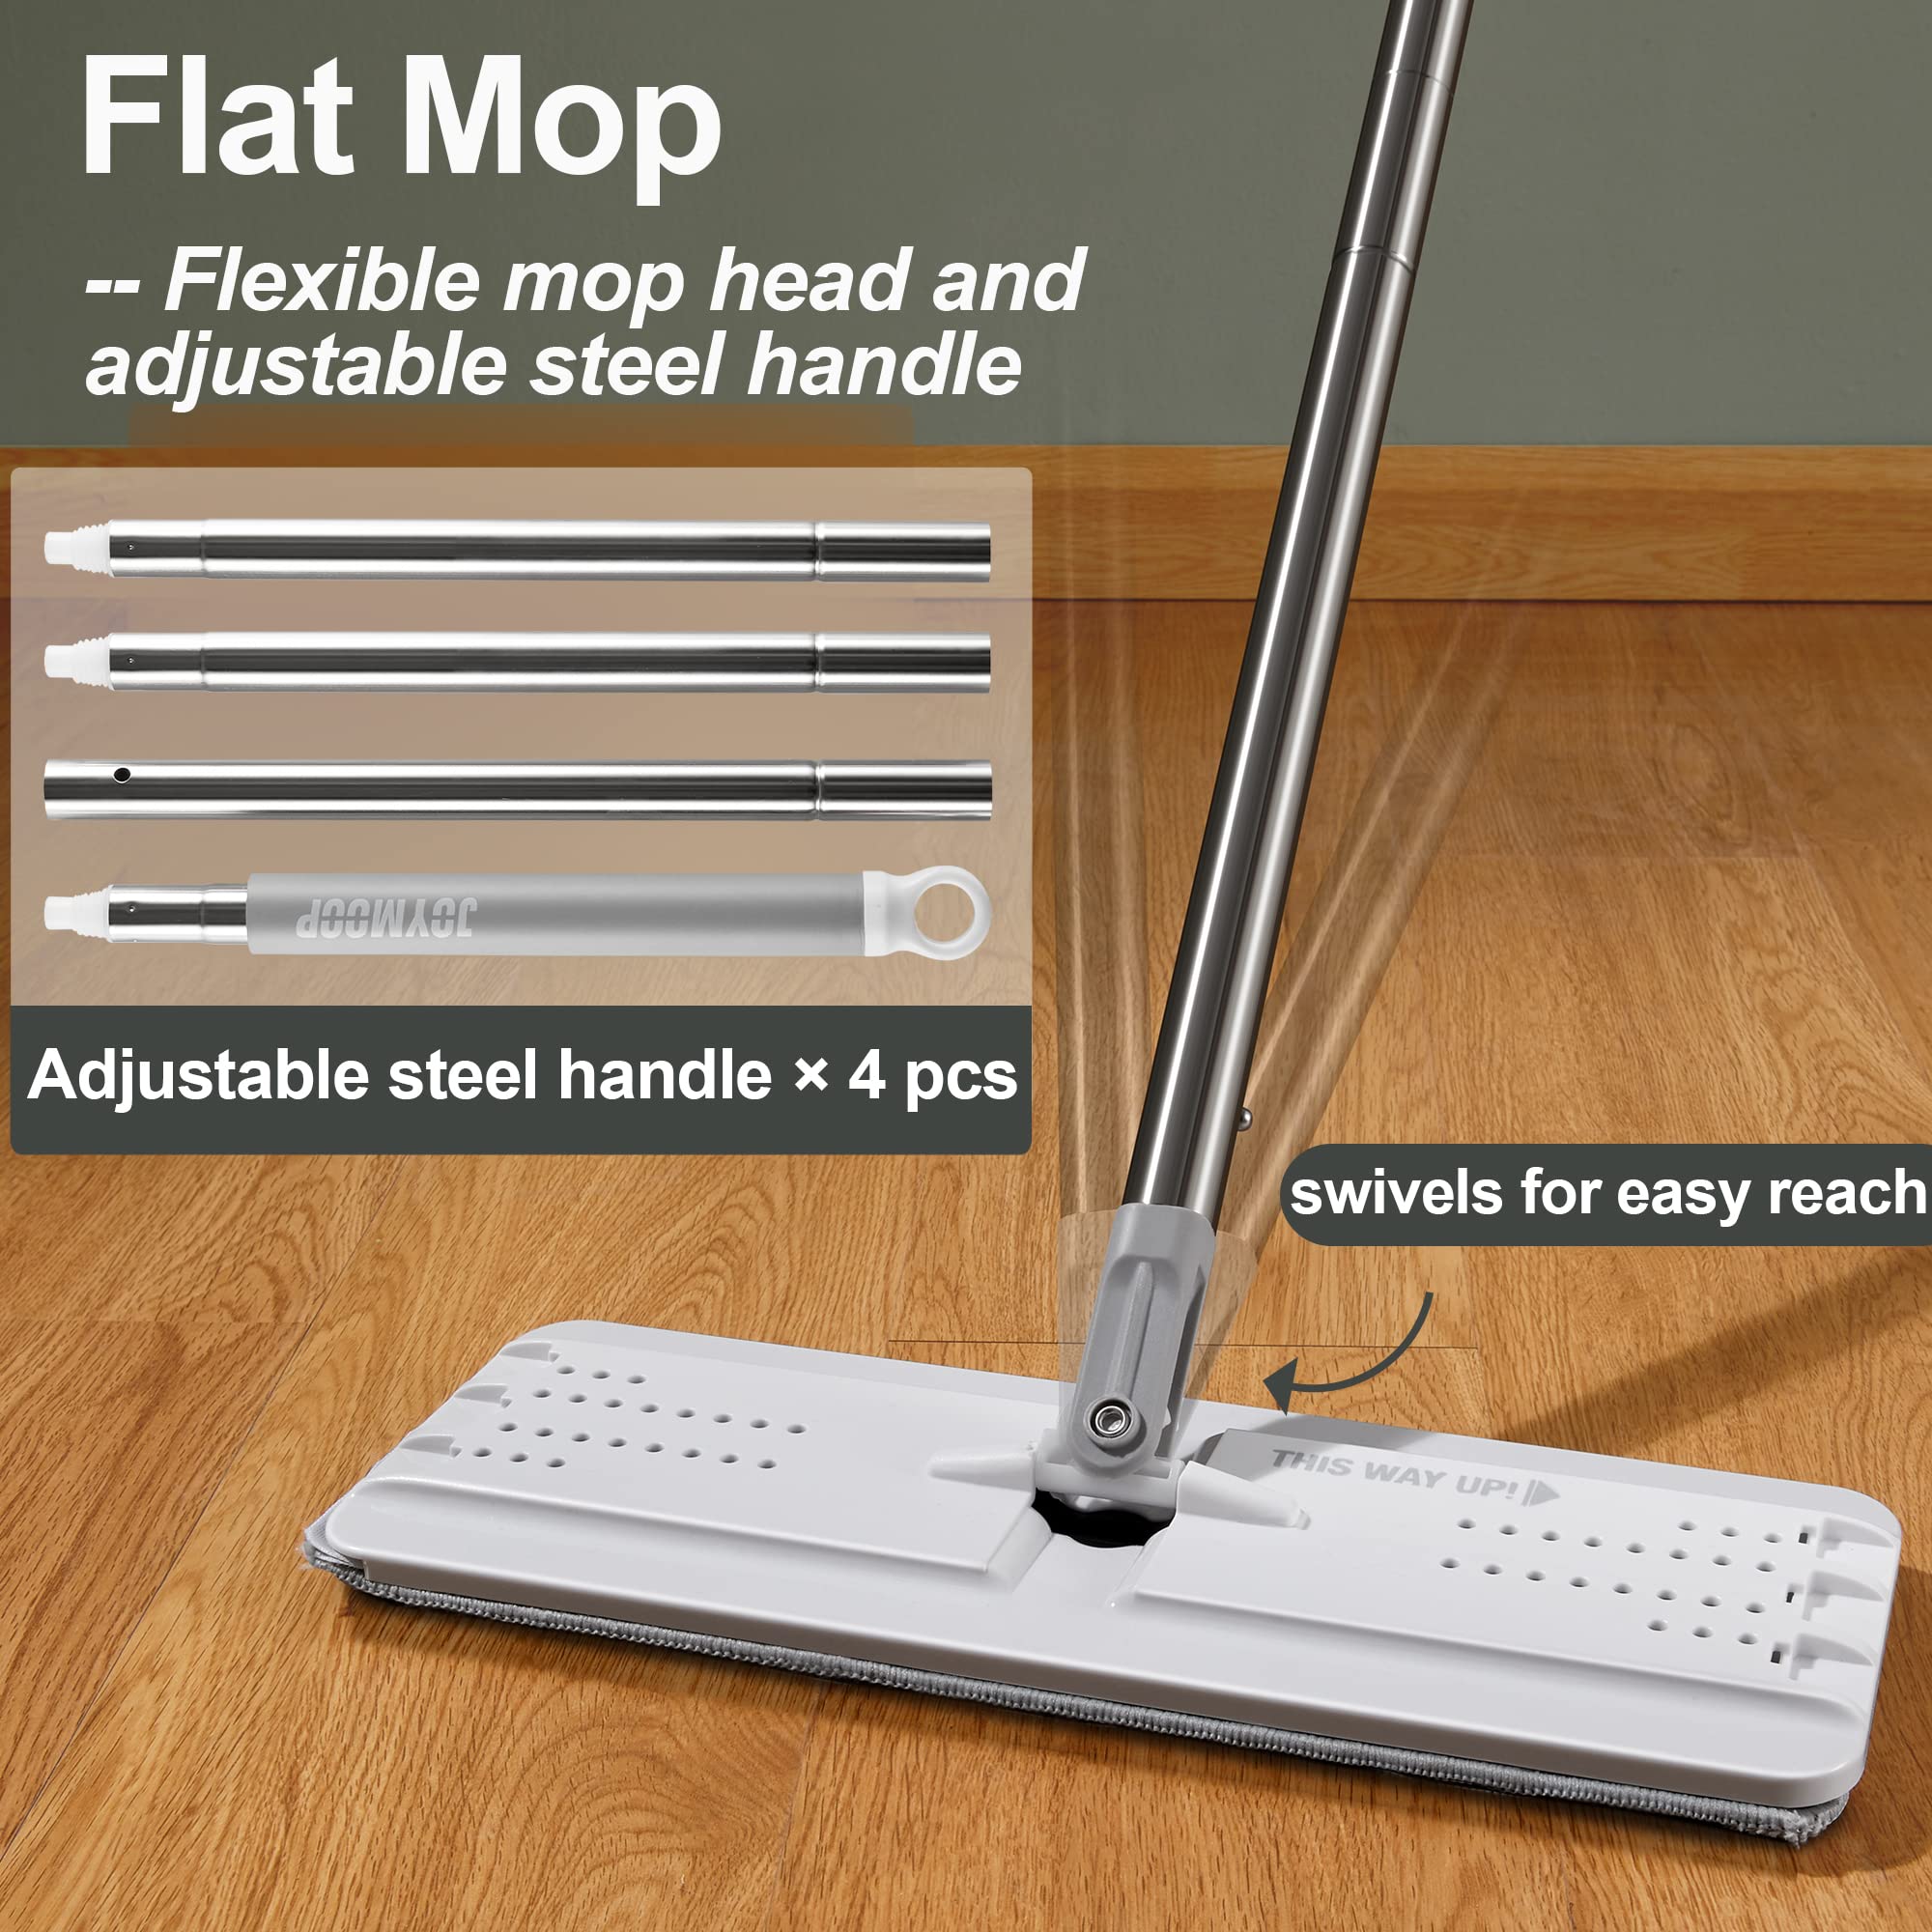 JOYMOOP Mop and Bucket with Wringer Set, Flat Floor Mop and Bucket, Mop for Floor Cleaning with 3 Microfiber Pads, Wet and Dry Use, Household Cleaning Tools,for Hardwood, Laminate, Tile